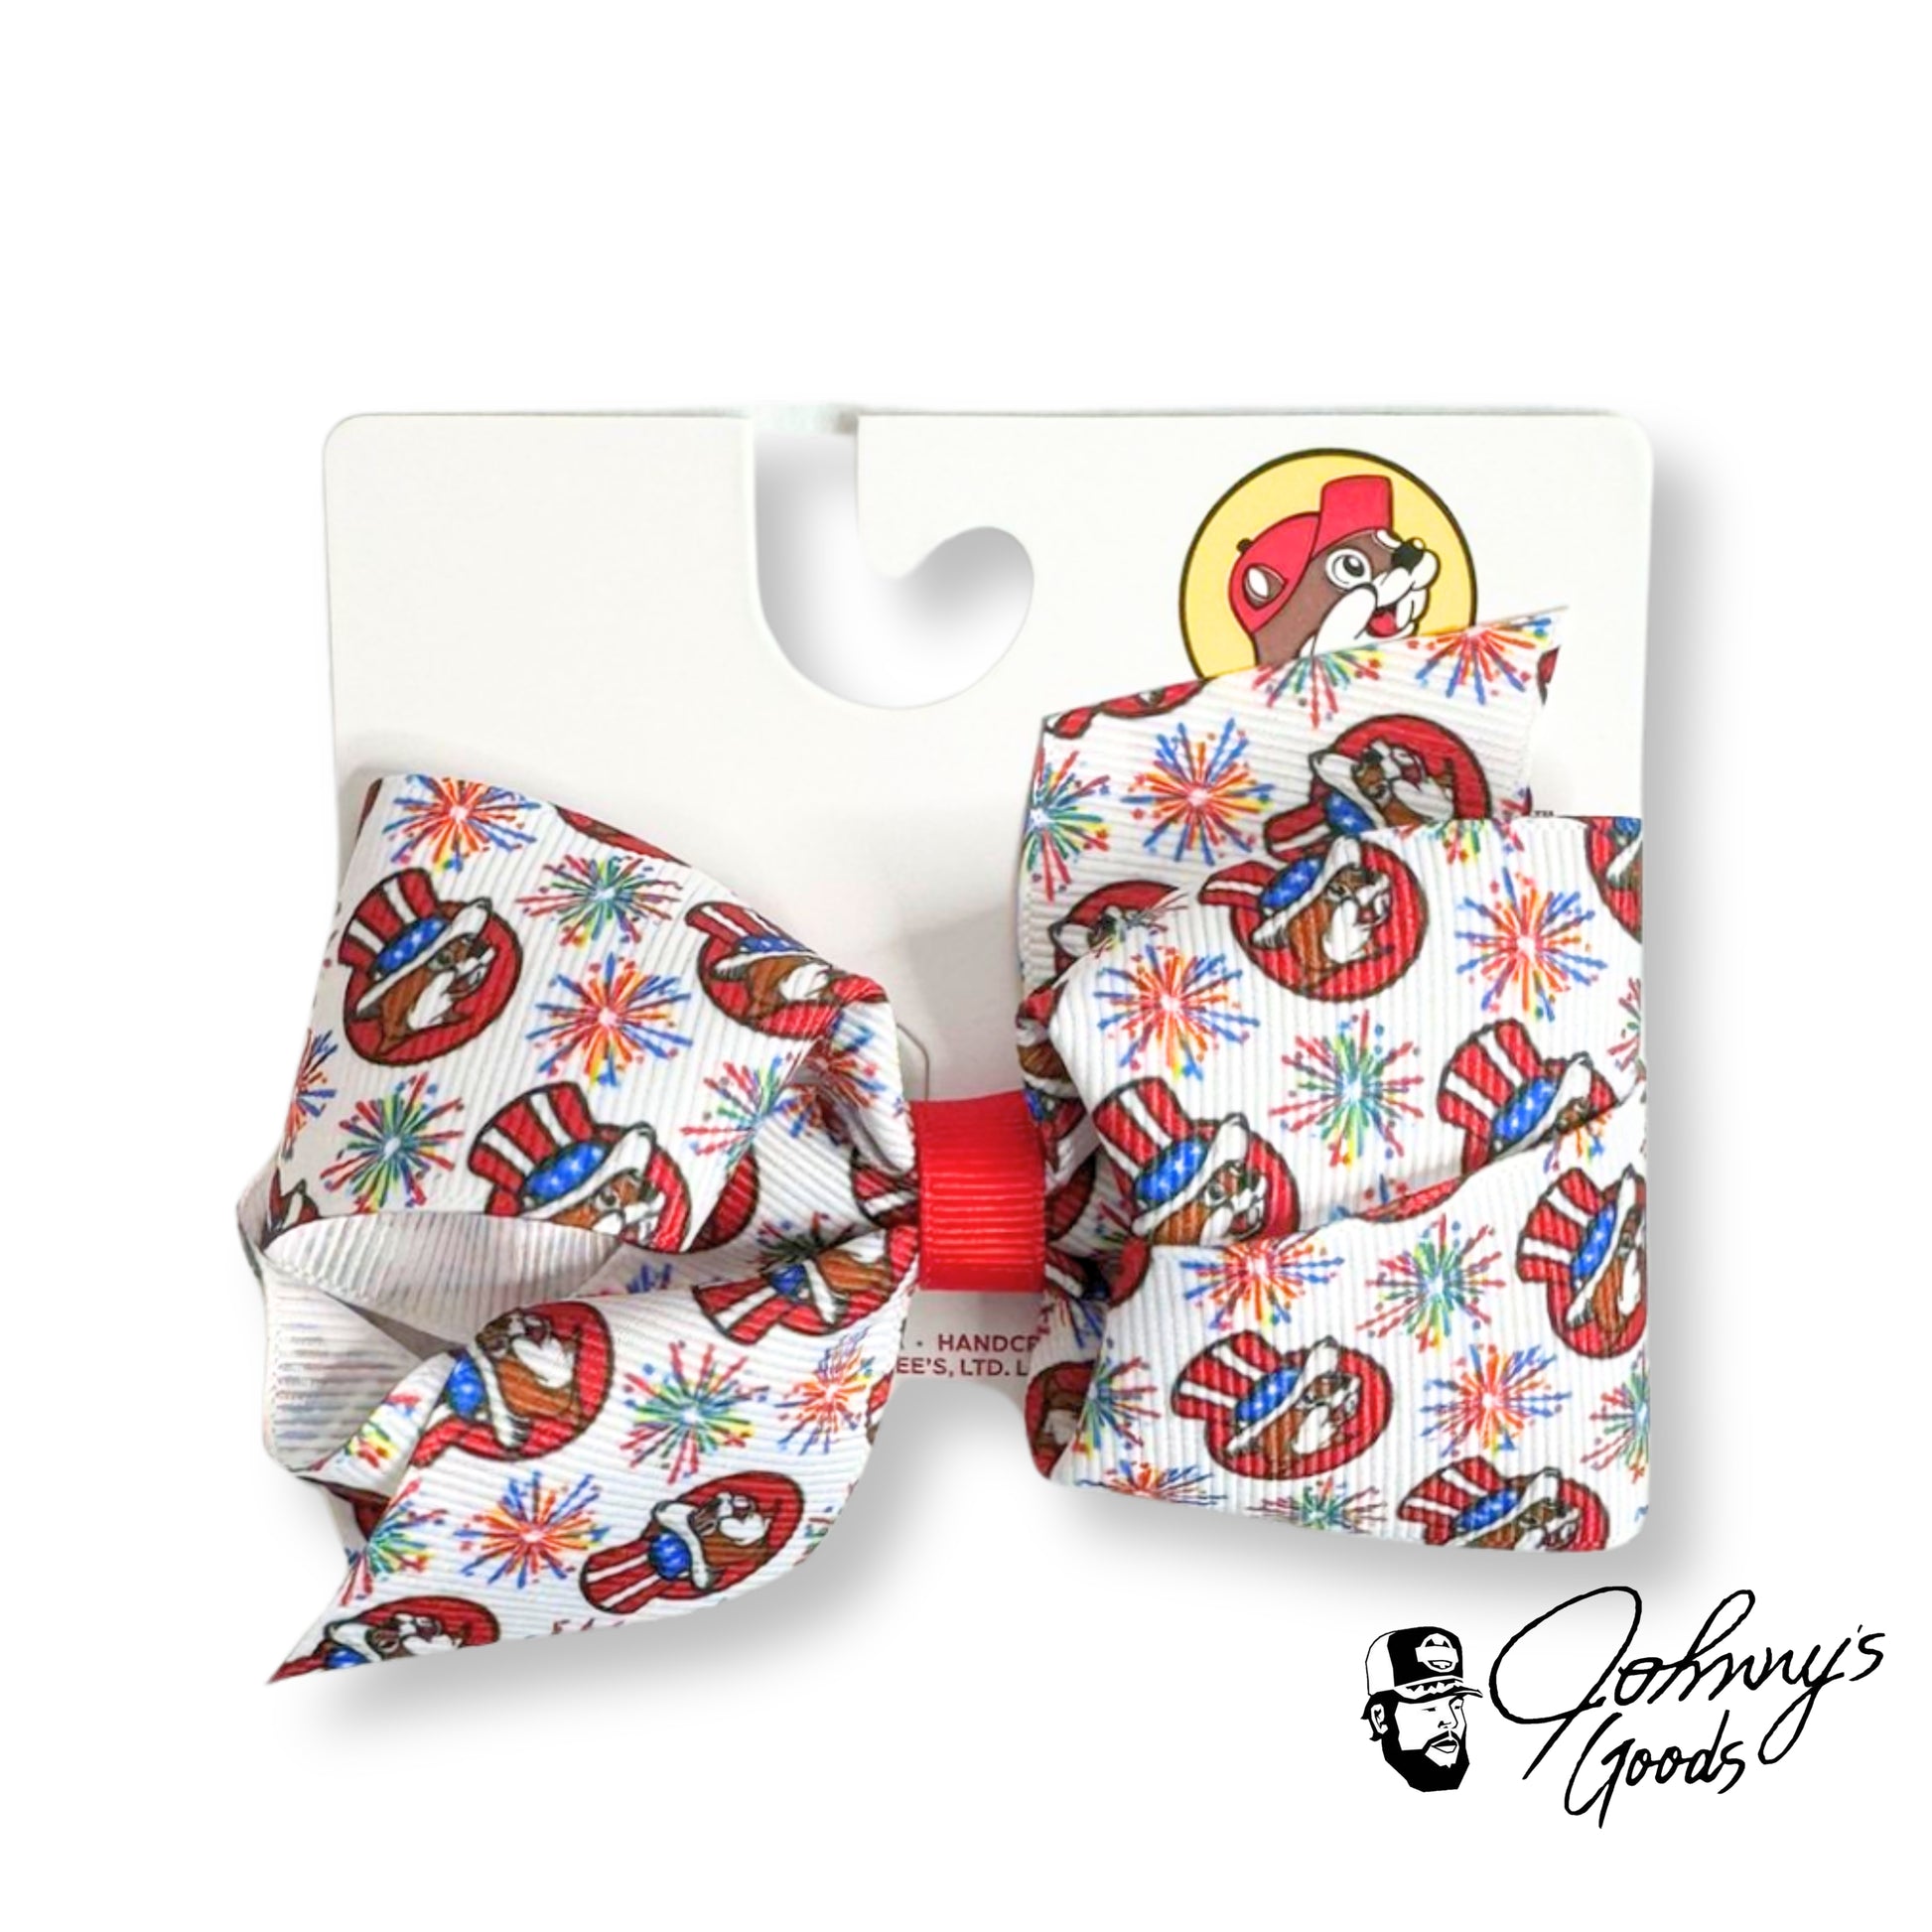 Buc-ee's 4th of July Hair Accessories, 2024 buc ees buc ee's bucees buccees buc-ees festive hair accessories bow tie headbands